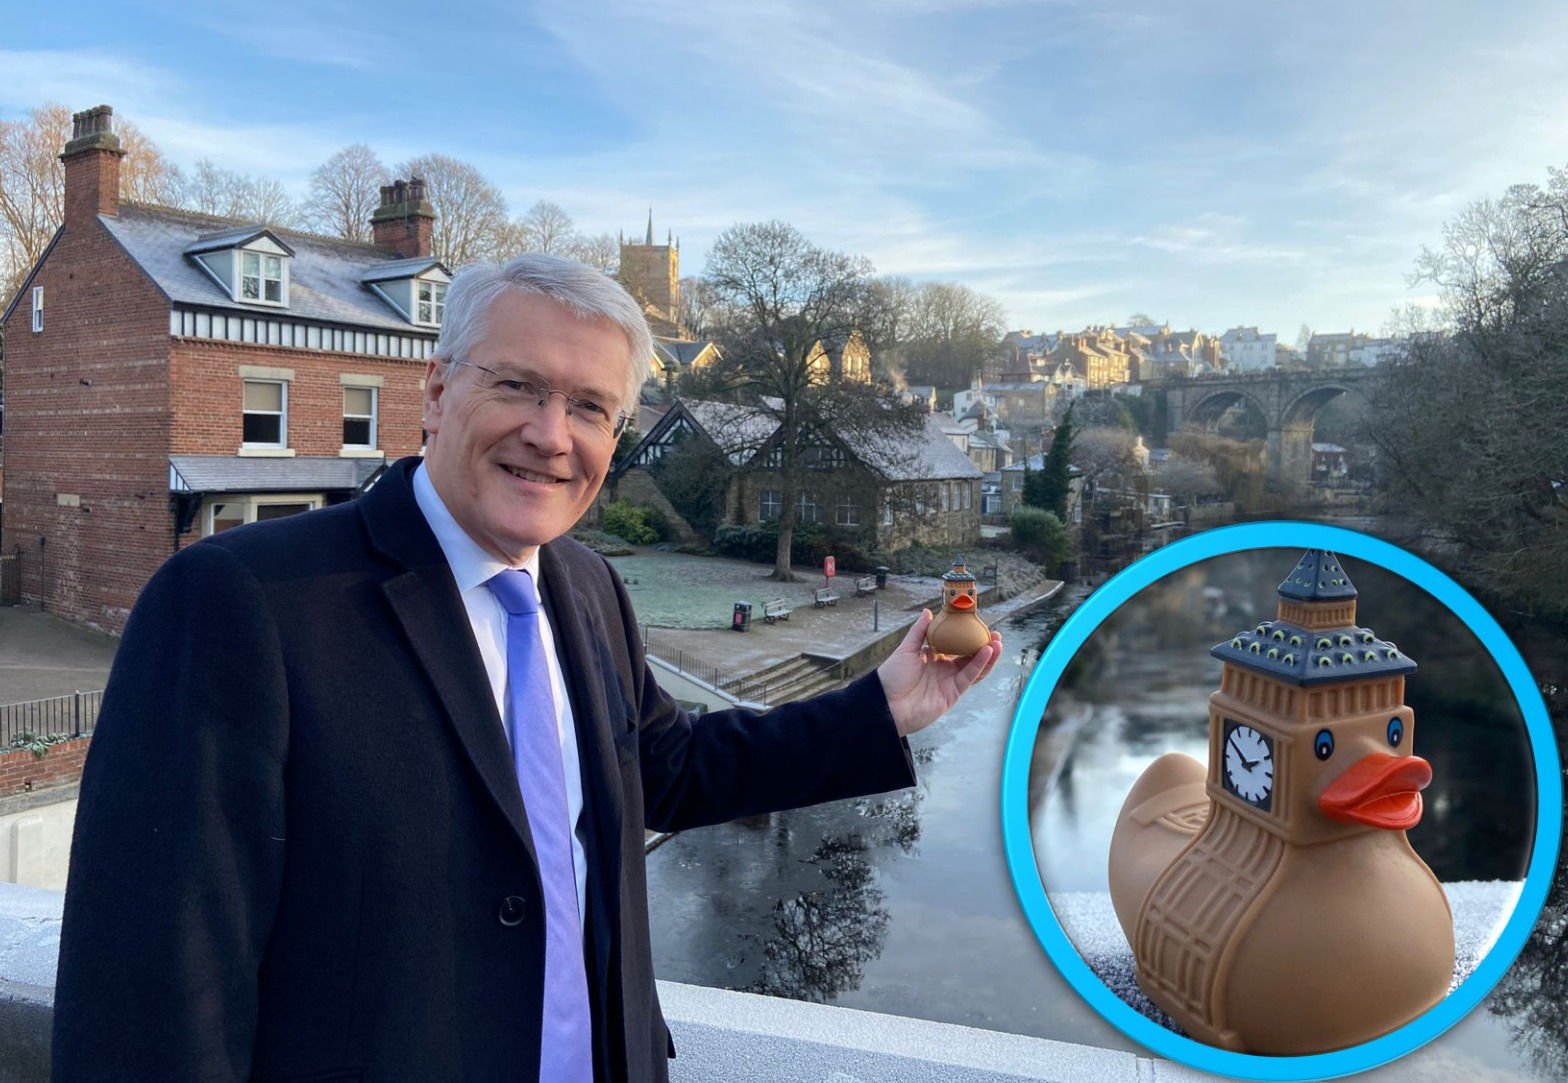 Knaresborough Cricket Club are continuing their tradition this year and will be running the New Year’s Day Duck Race on the River Nidd in Knaresborough